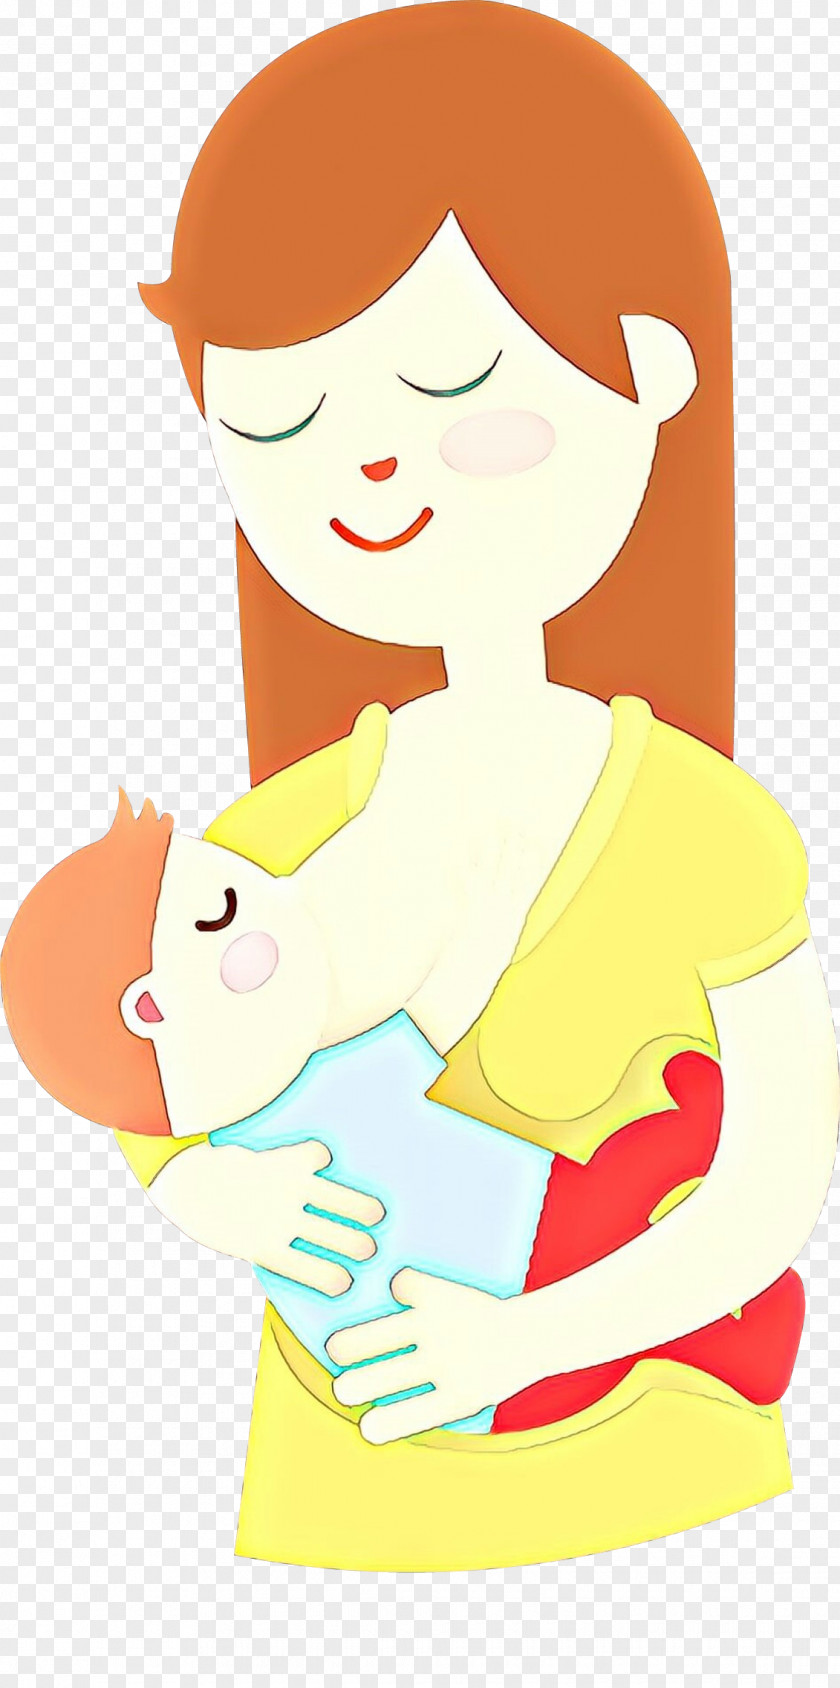 Weaning Image Video Illustration Clip Art PNG